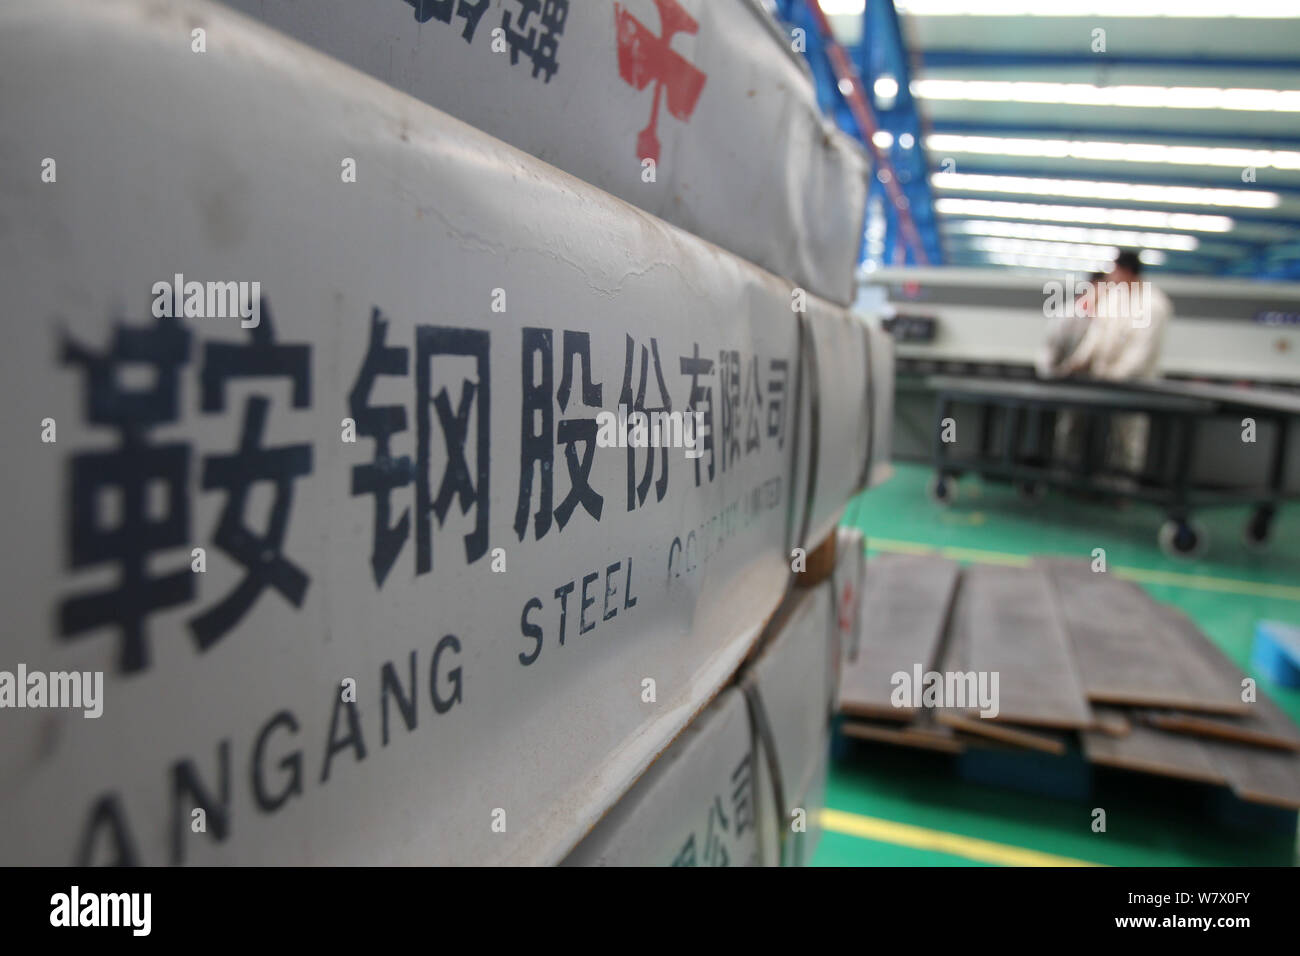 FILE--Chinese workers labor at a steel plant of Ansteel, or Angang Steel  Company Limited, a subsidiary of Anshan Iron and Steel Group, in Nantong ci  Stock Photo - Alamy